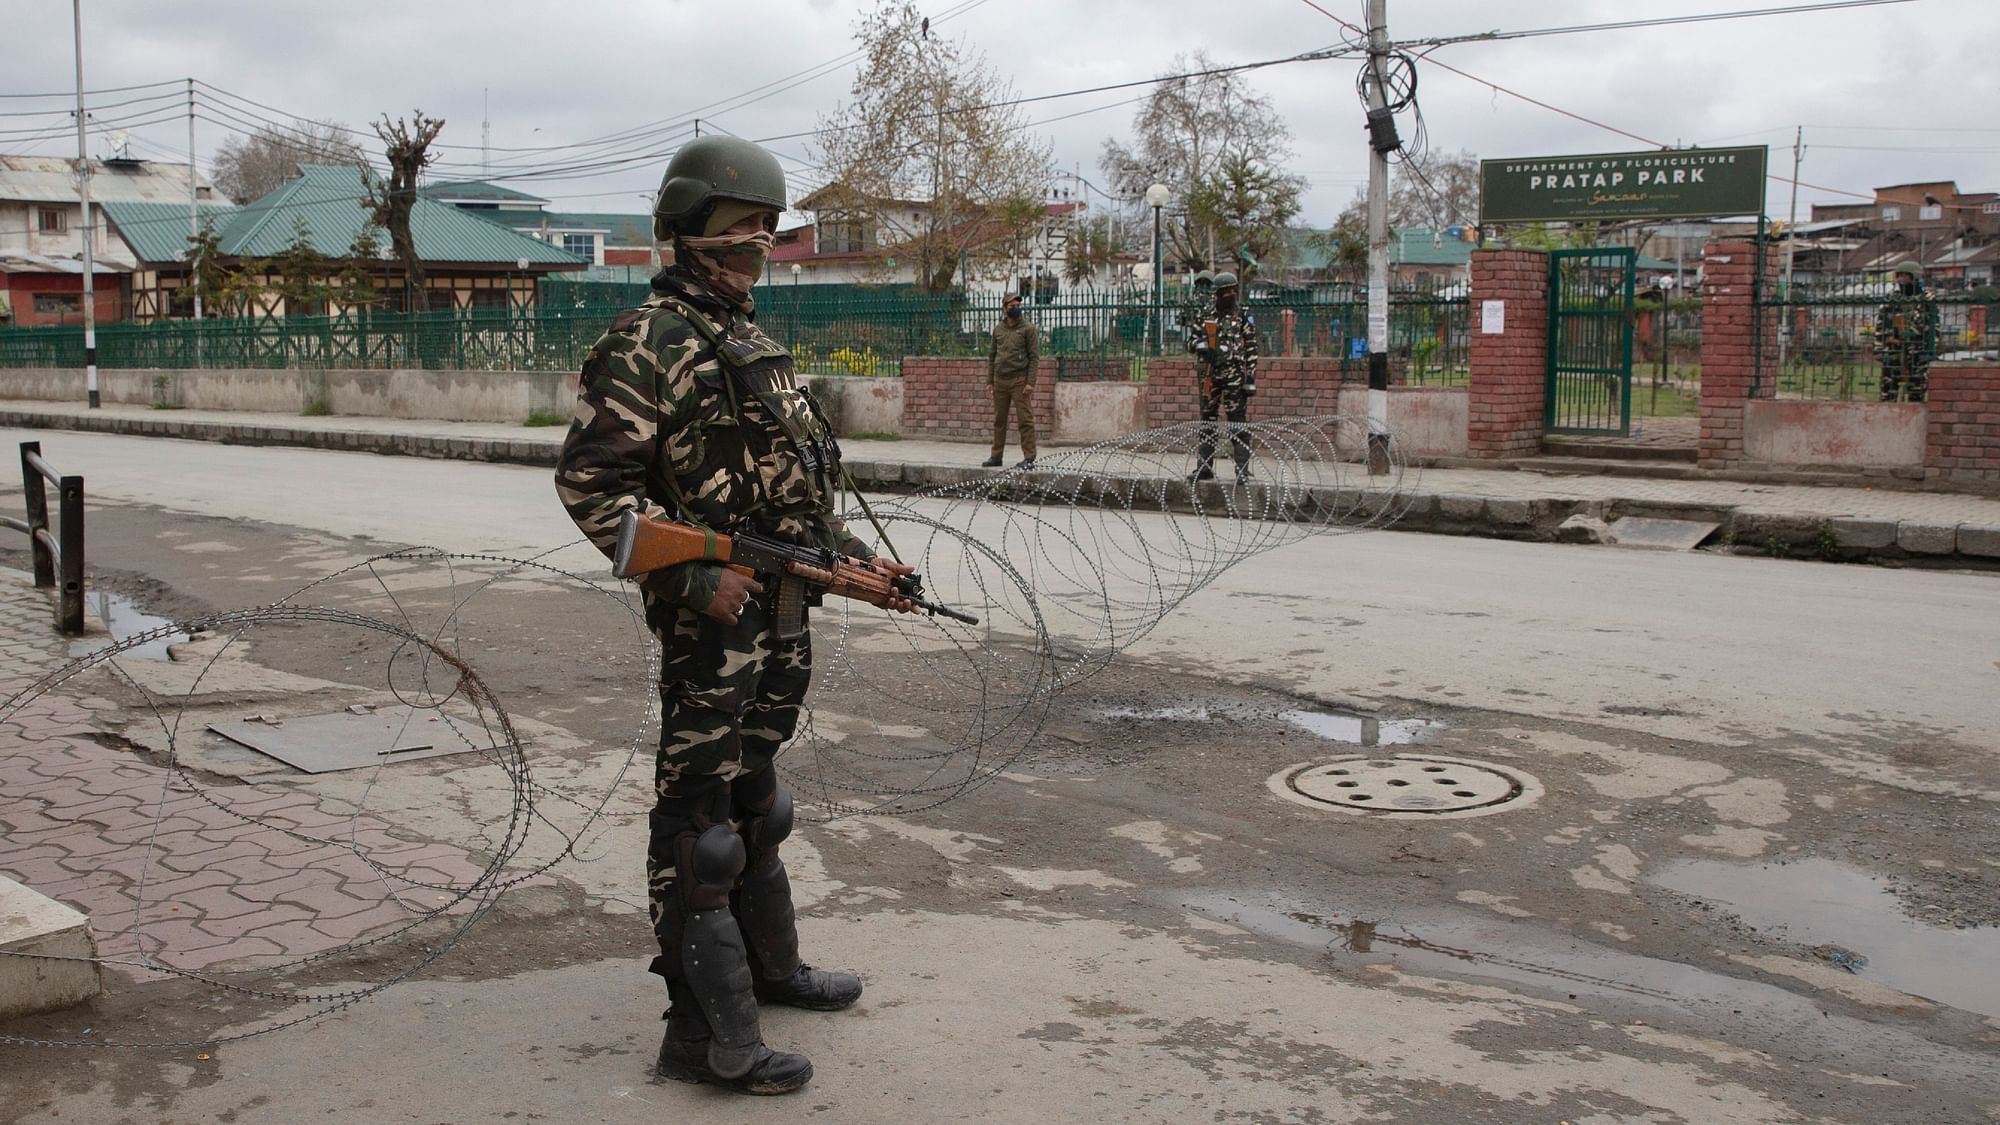 16-year-old Athar Mushtaq was among the three killed in an alleged encounter in Srinagar’s Lawaypora, on 30 December. Image used for representation.